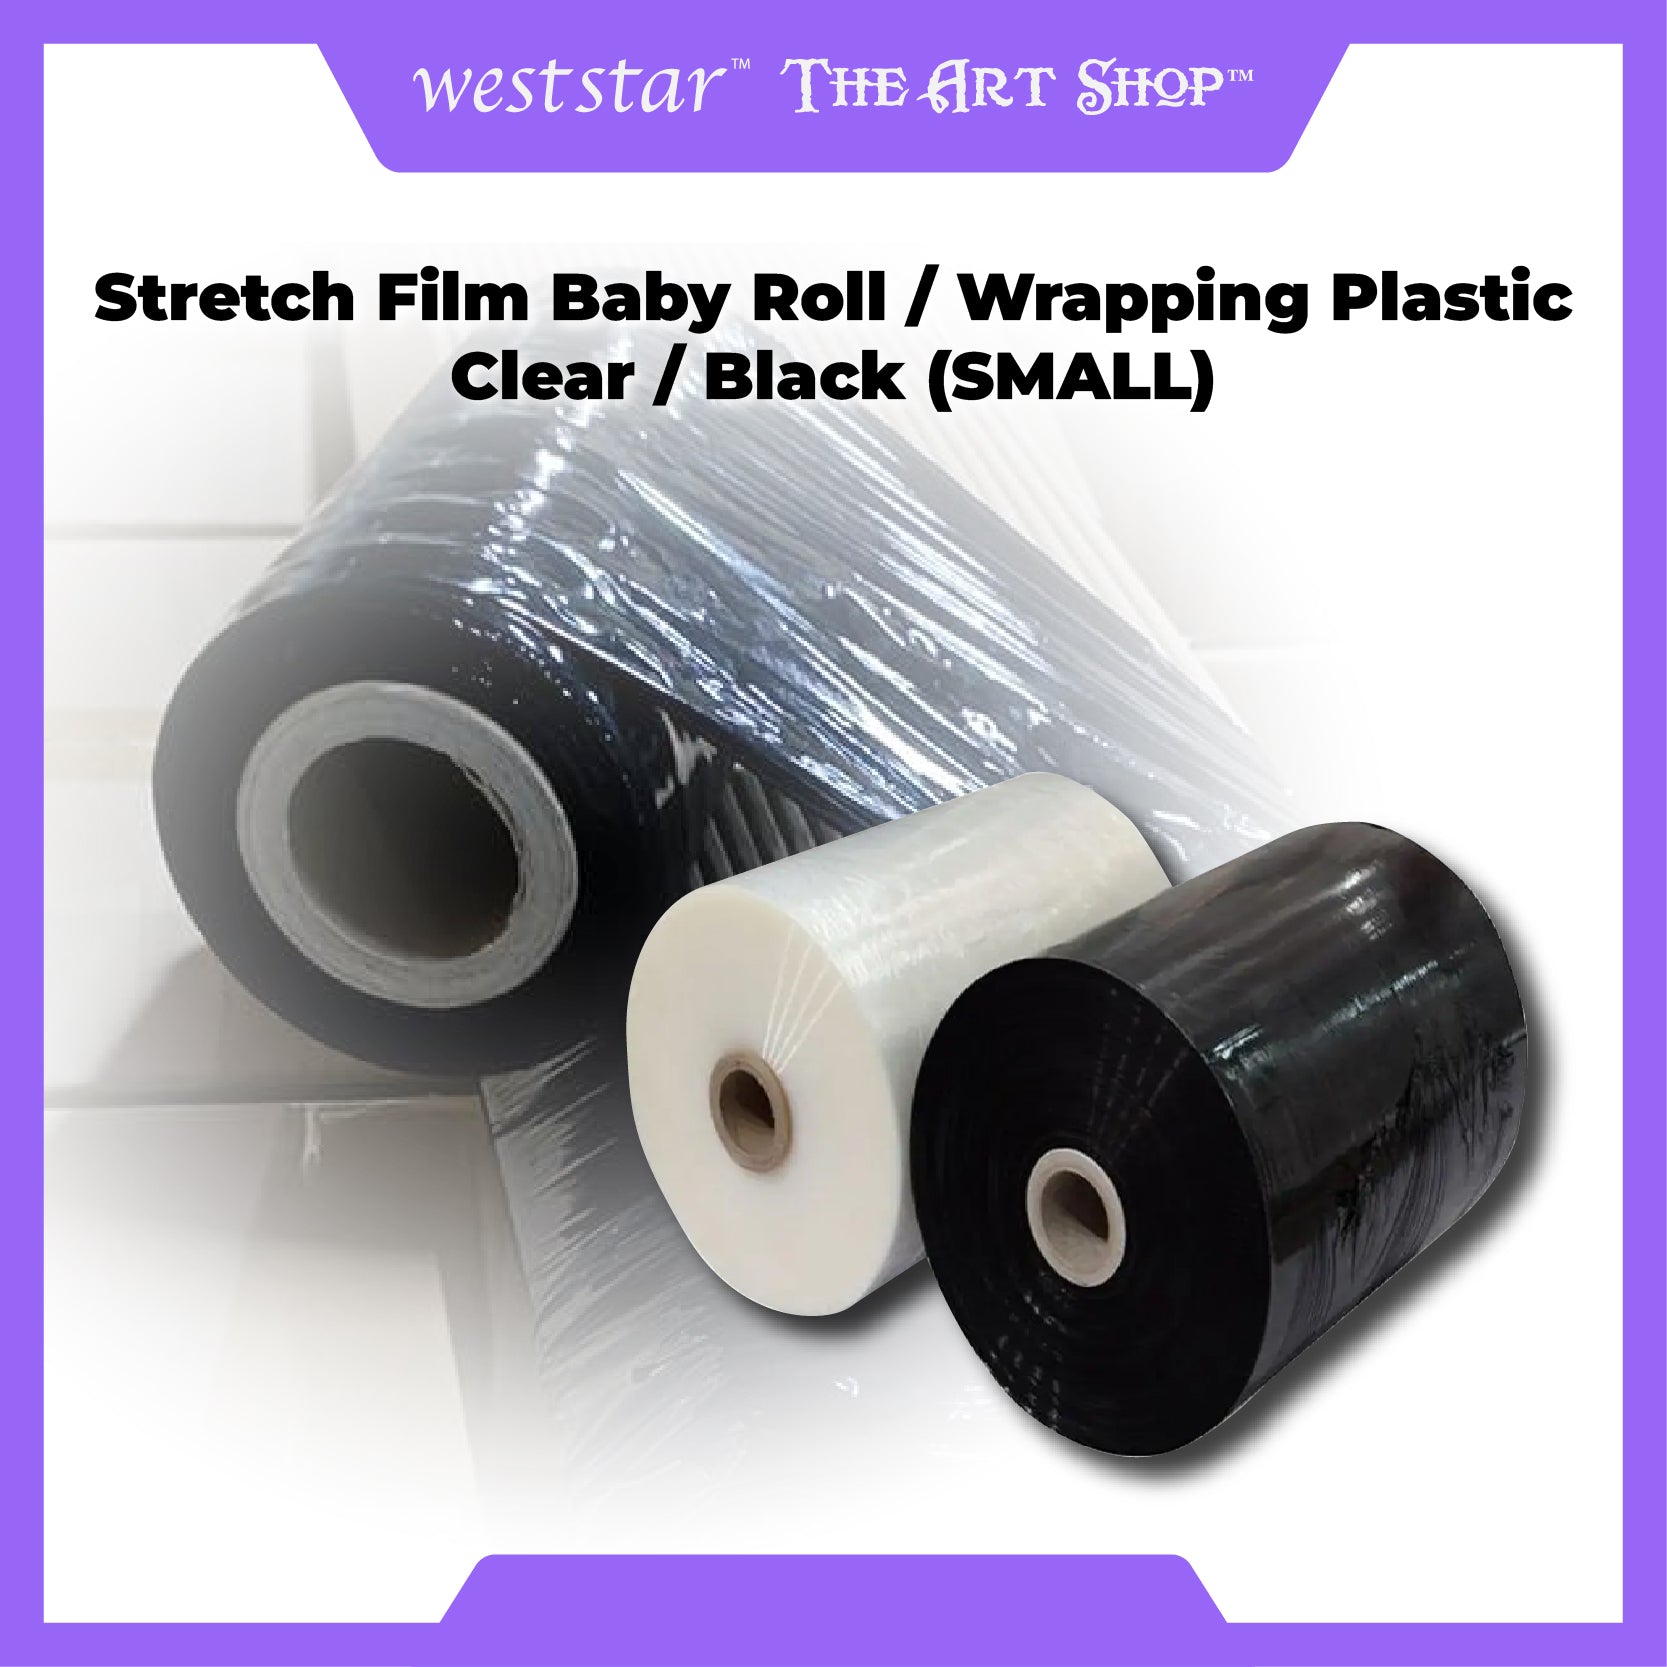 [WESTSTAR] Stretch Film Baby Roll / Wrapping Plastic / Shrink Wrap / Plastic Wrap Transparent - Clear / Black (SMALL)